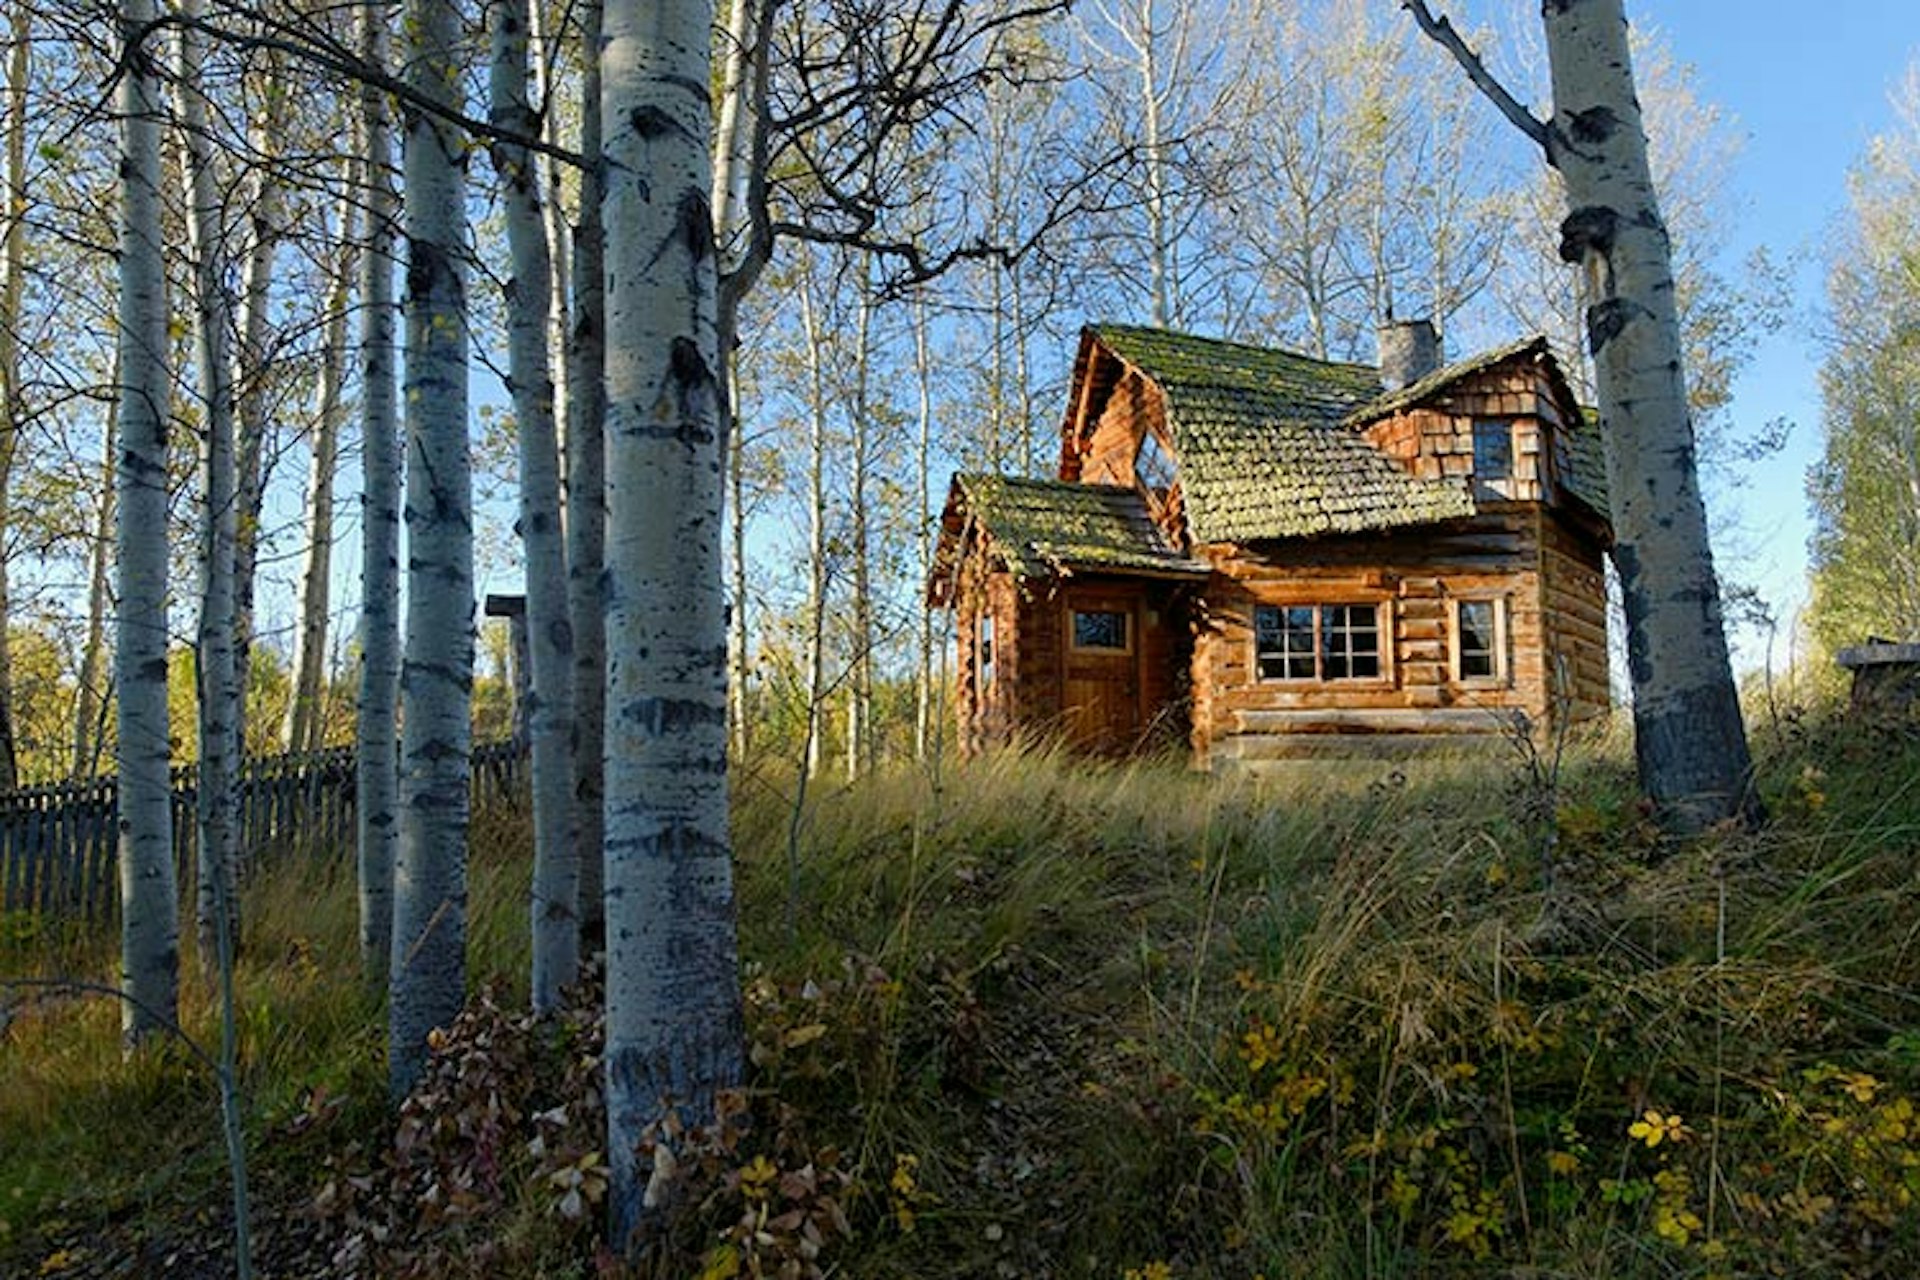 Could you cope with the long-term isolation in your cabin in the woods? Michael Wheatley / All Canada Photos / Getty Images